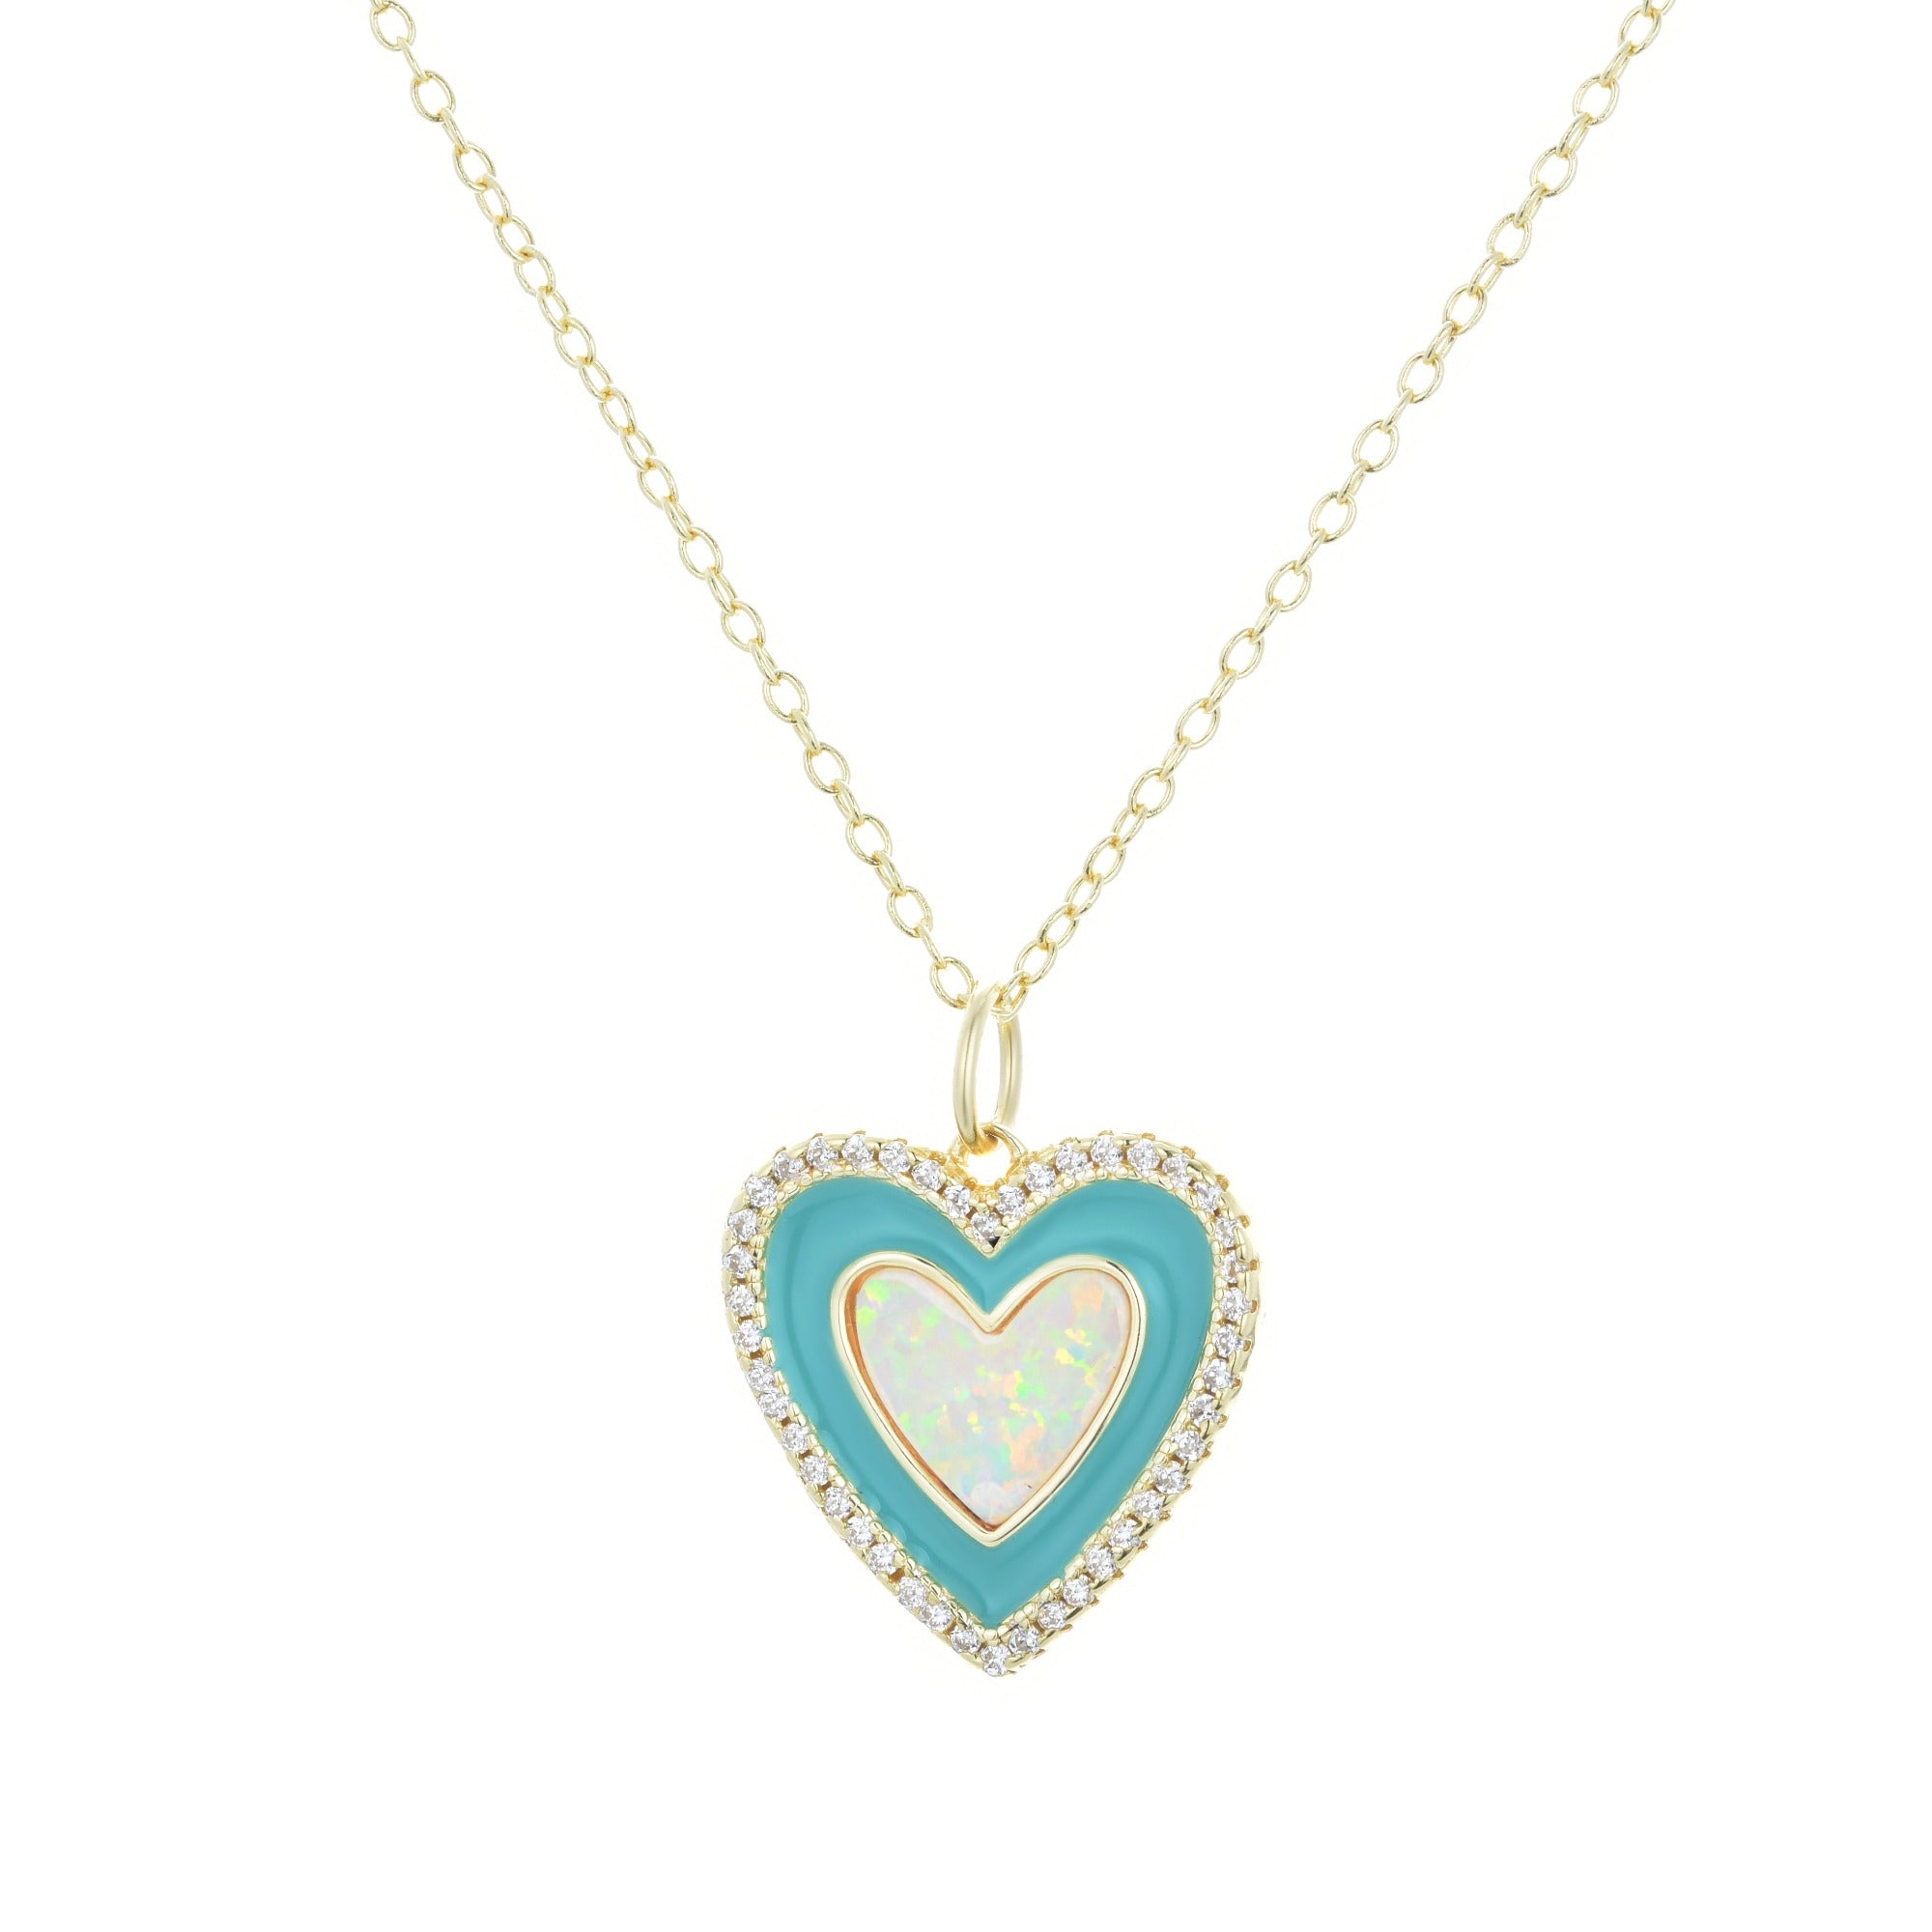 Two Tone Heart Necklace - Turquoise Enamel and Opal